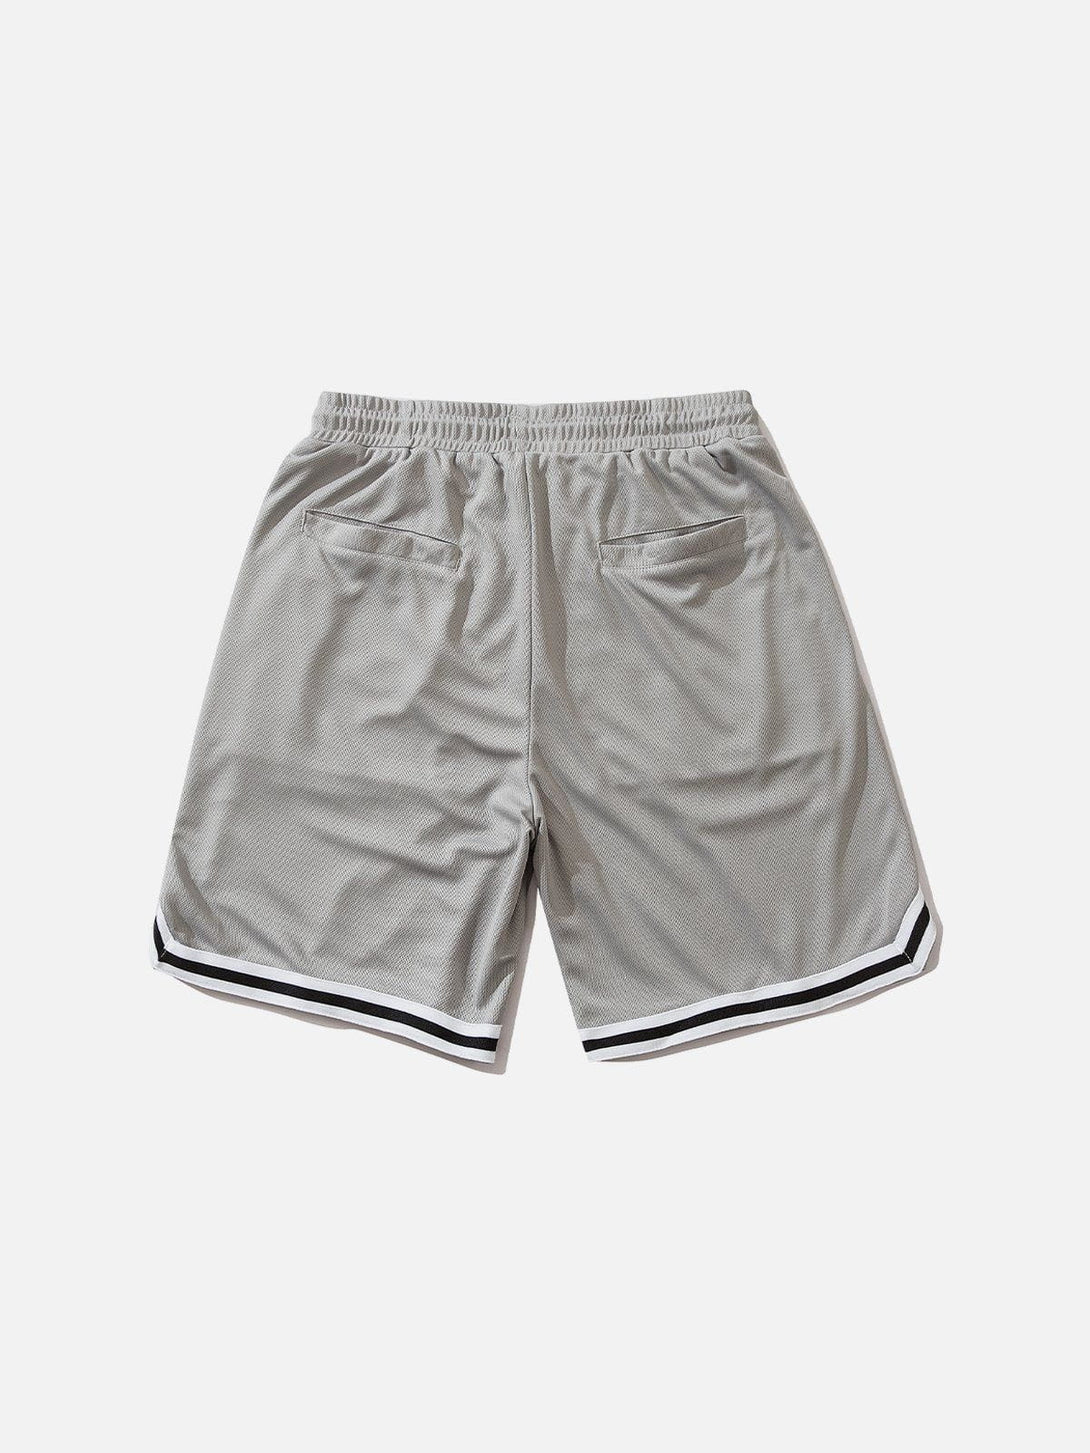 Levefly - Applique Embroidery Stripes Shorts - Streetwear Fashion - levefly.com